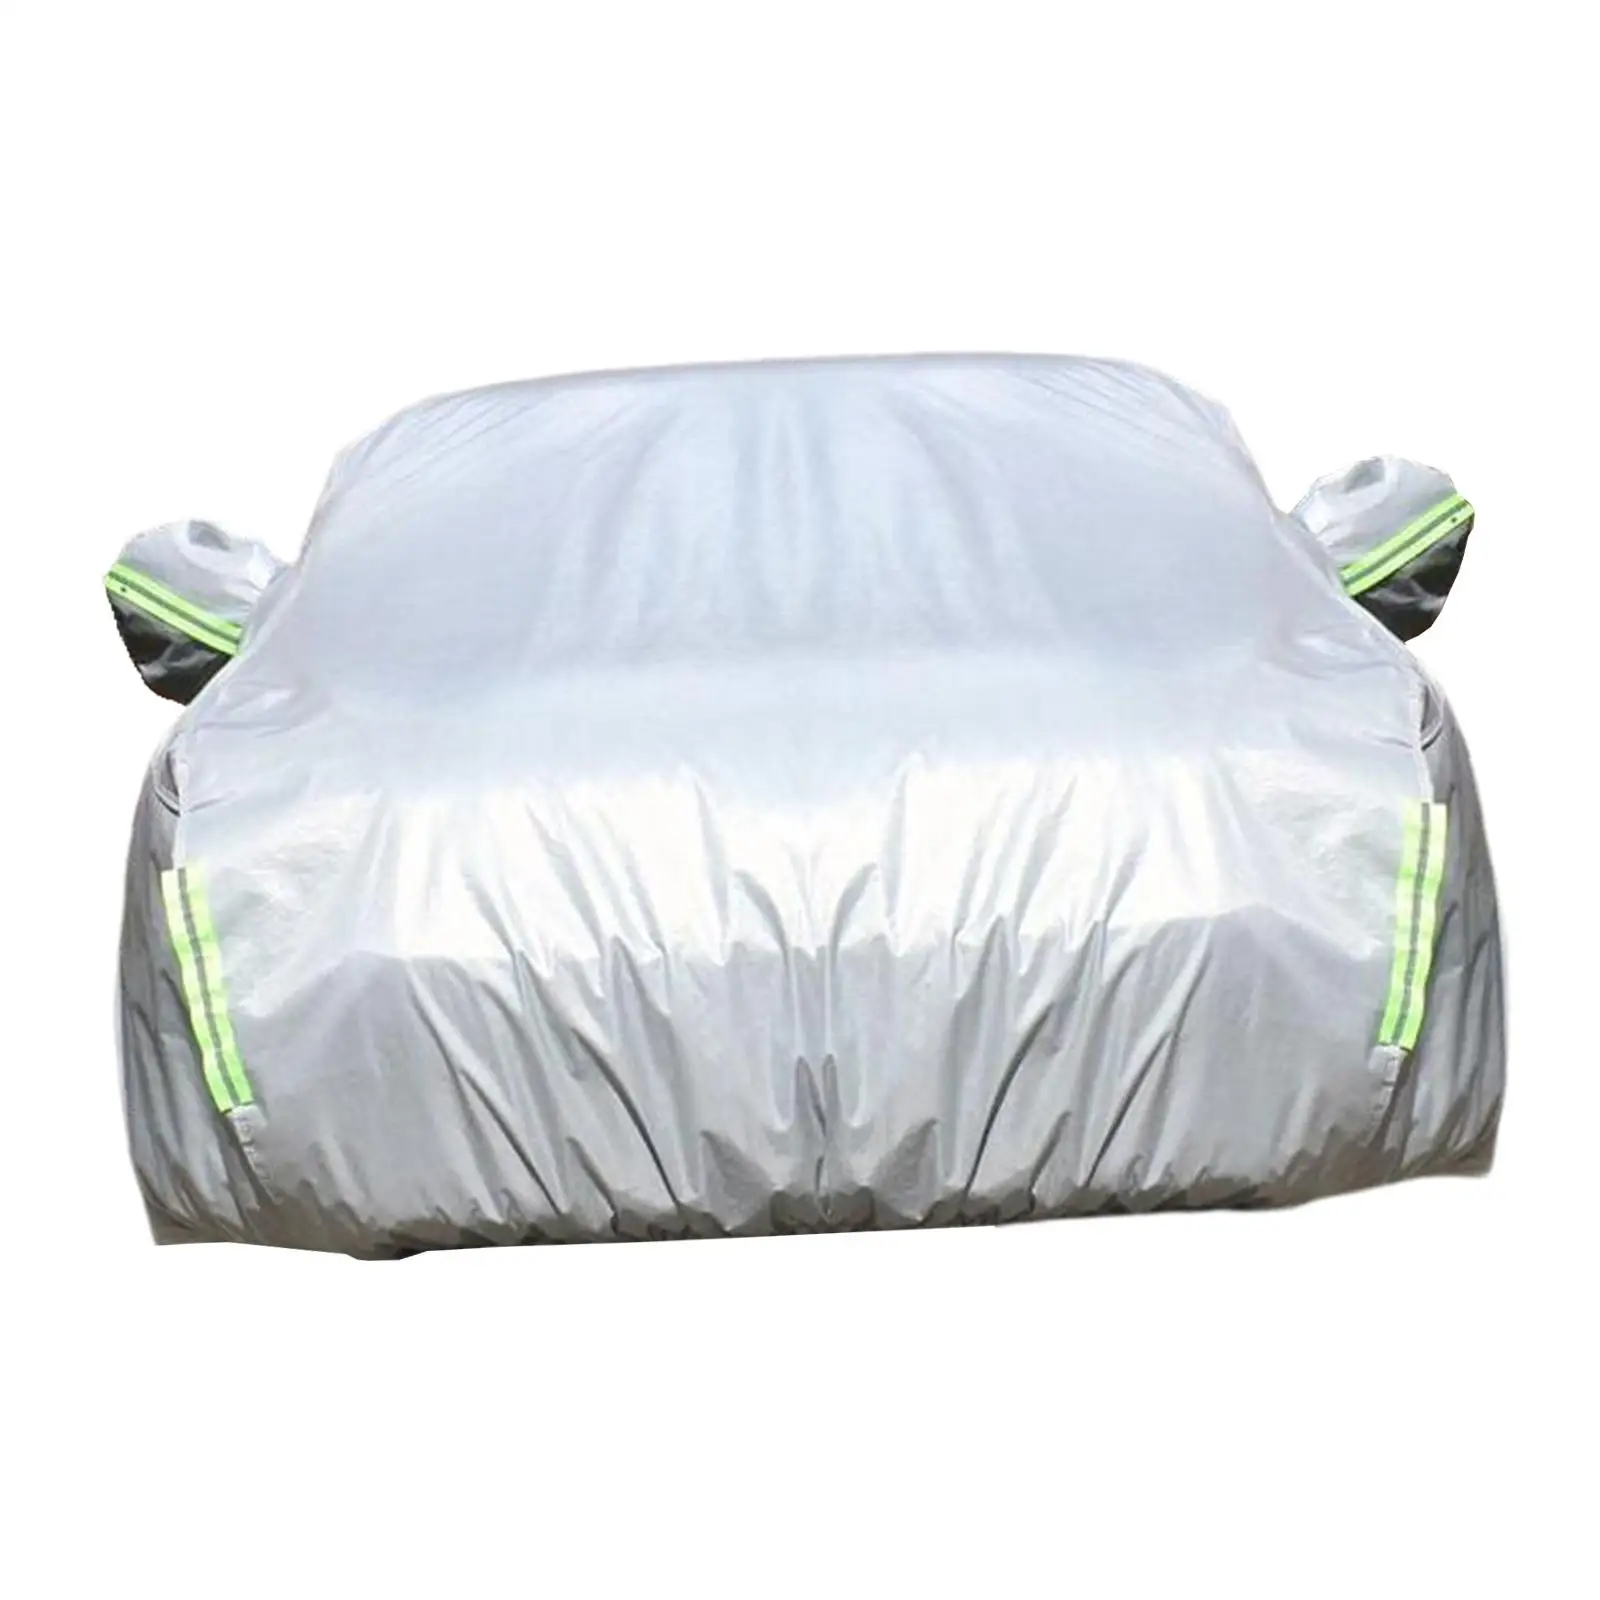 Automobile Full Exterior Covers for Atto 3 Yuan Plus Rain Sun Protection with Door Zipper Accessories Multi Layer Material